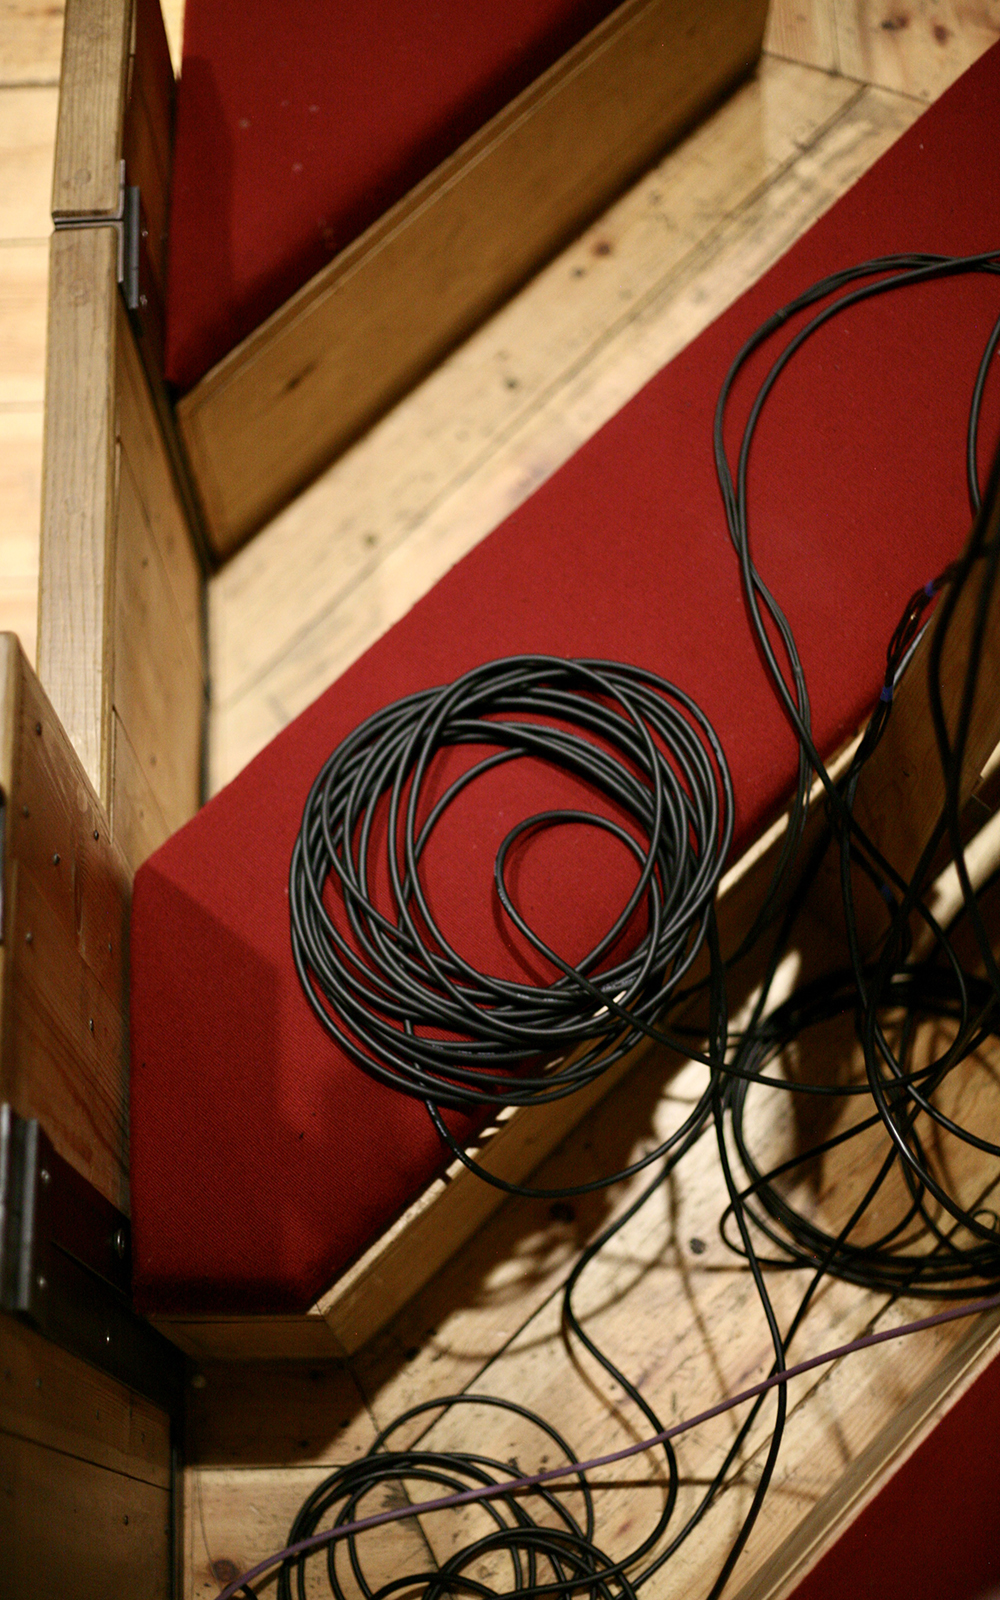 Coiled up cables resting on one of the seats in the Sam Wanamaker Playhouse